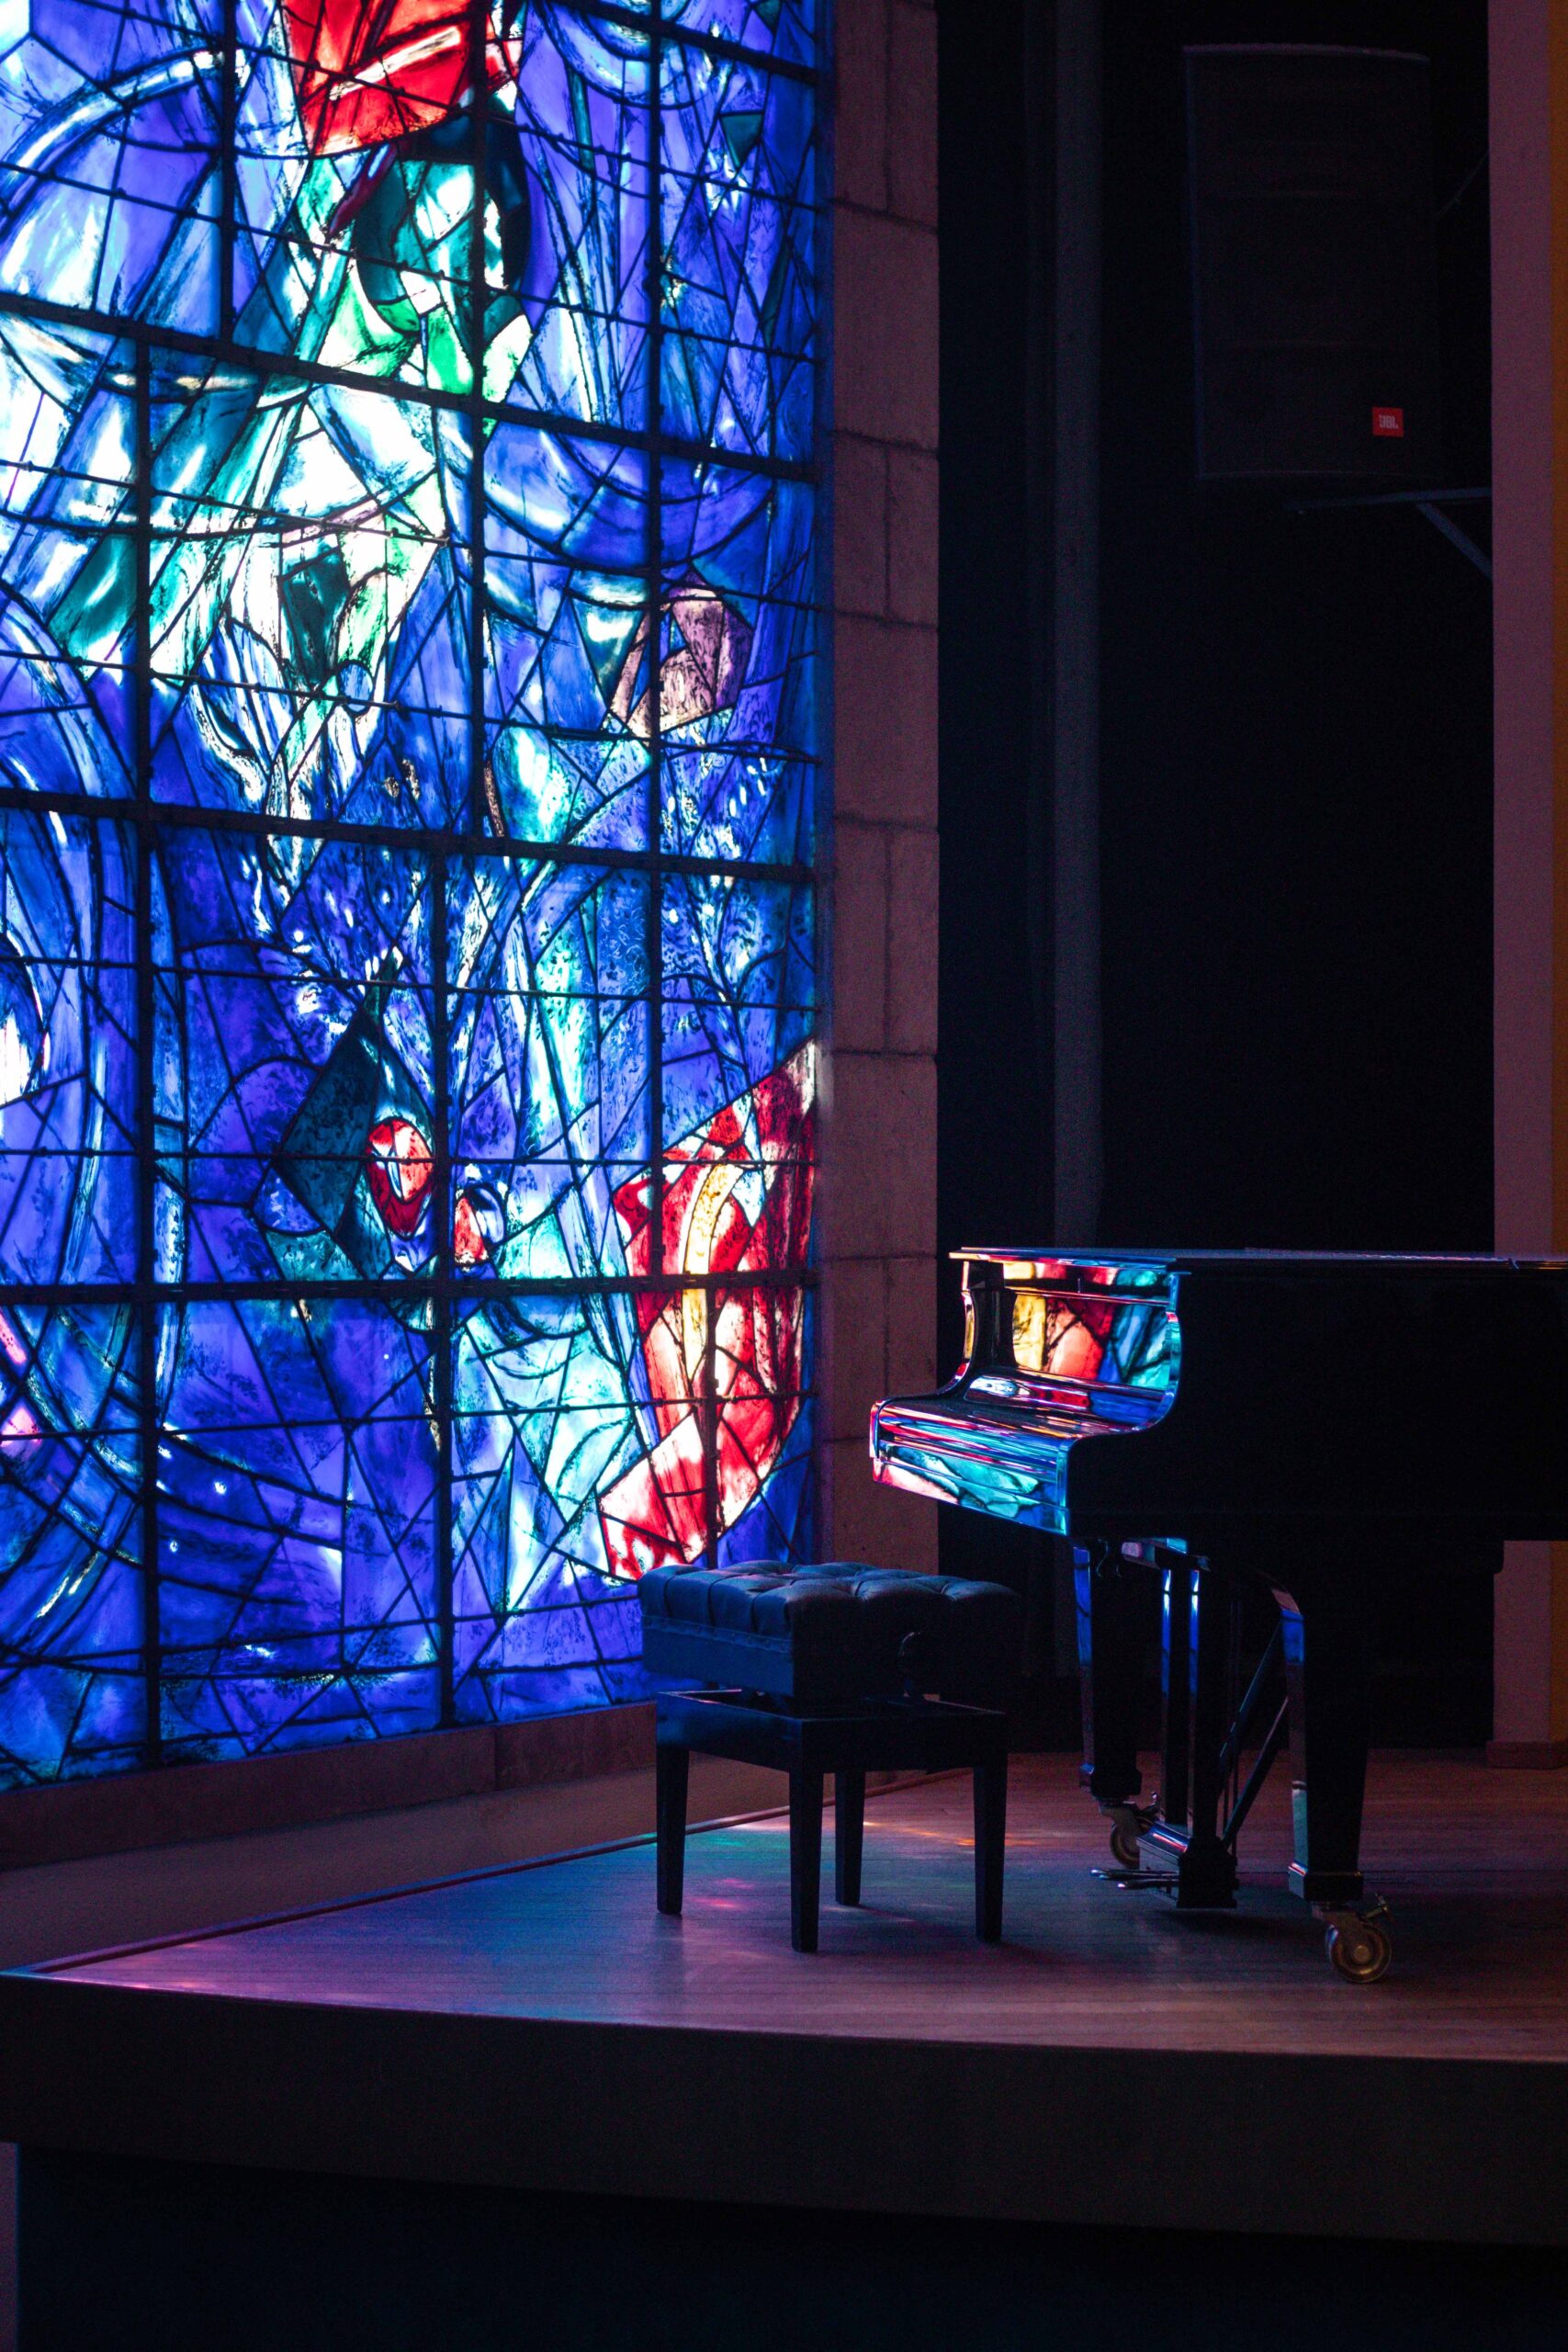 Piano and stained glass inside the chapel of the Marc Chagall National Museum (Musée National Marc Chagall) in Nice, France